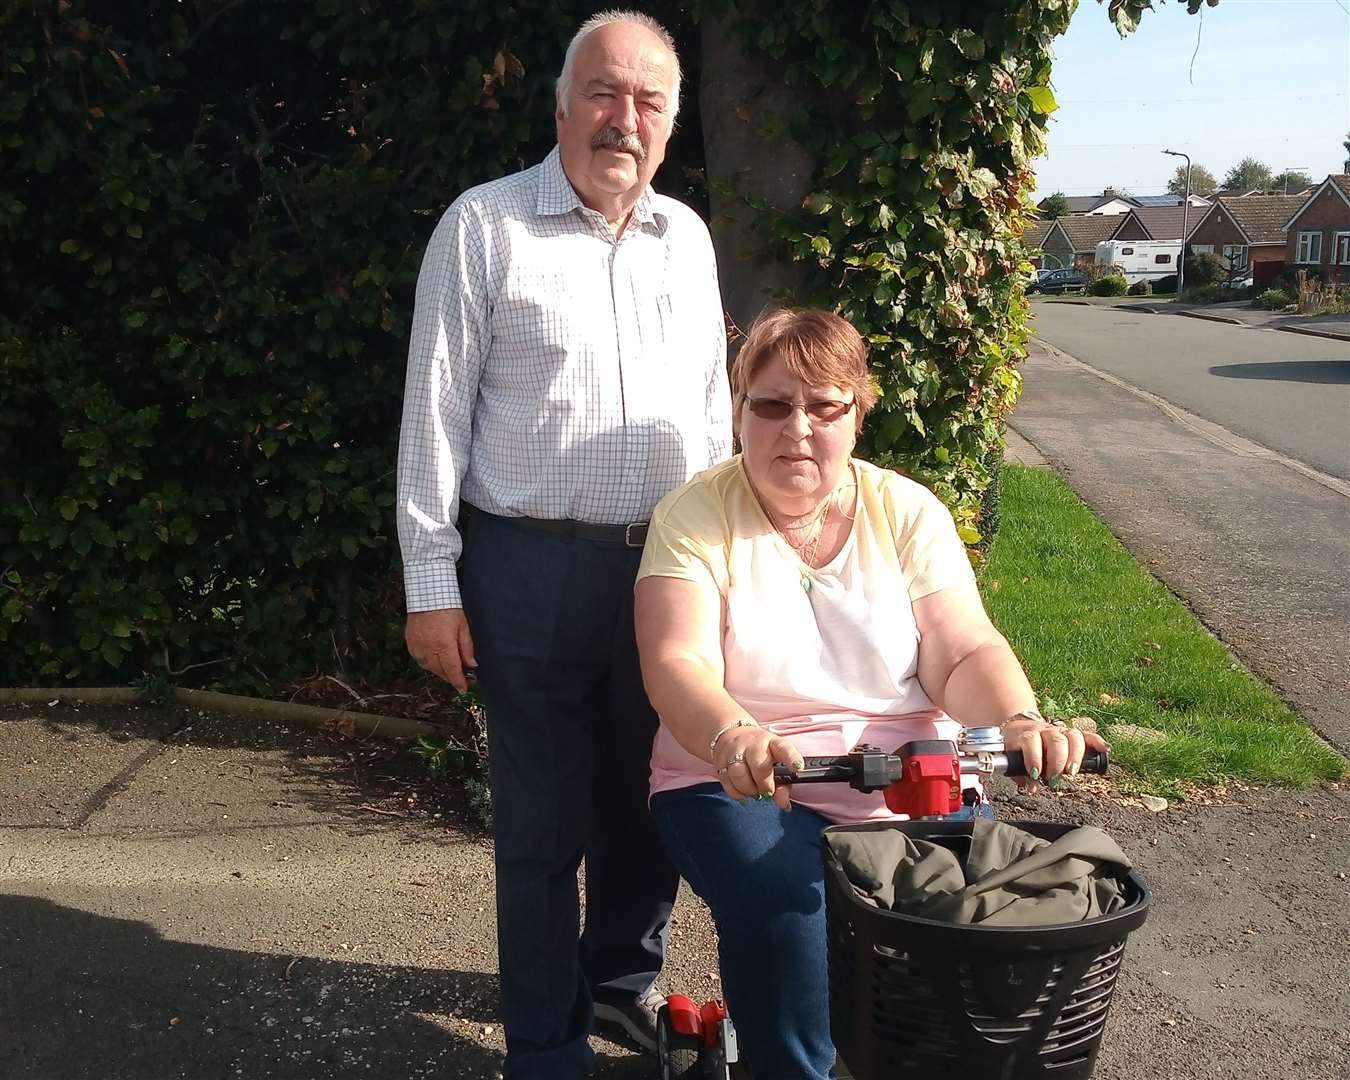 Steve and Ann Ingham were left stunned after being told by a bus driver in Canterbury that mobility scooters were not allowed on board